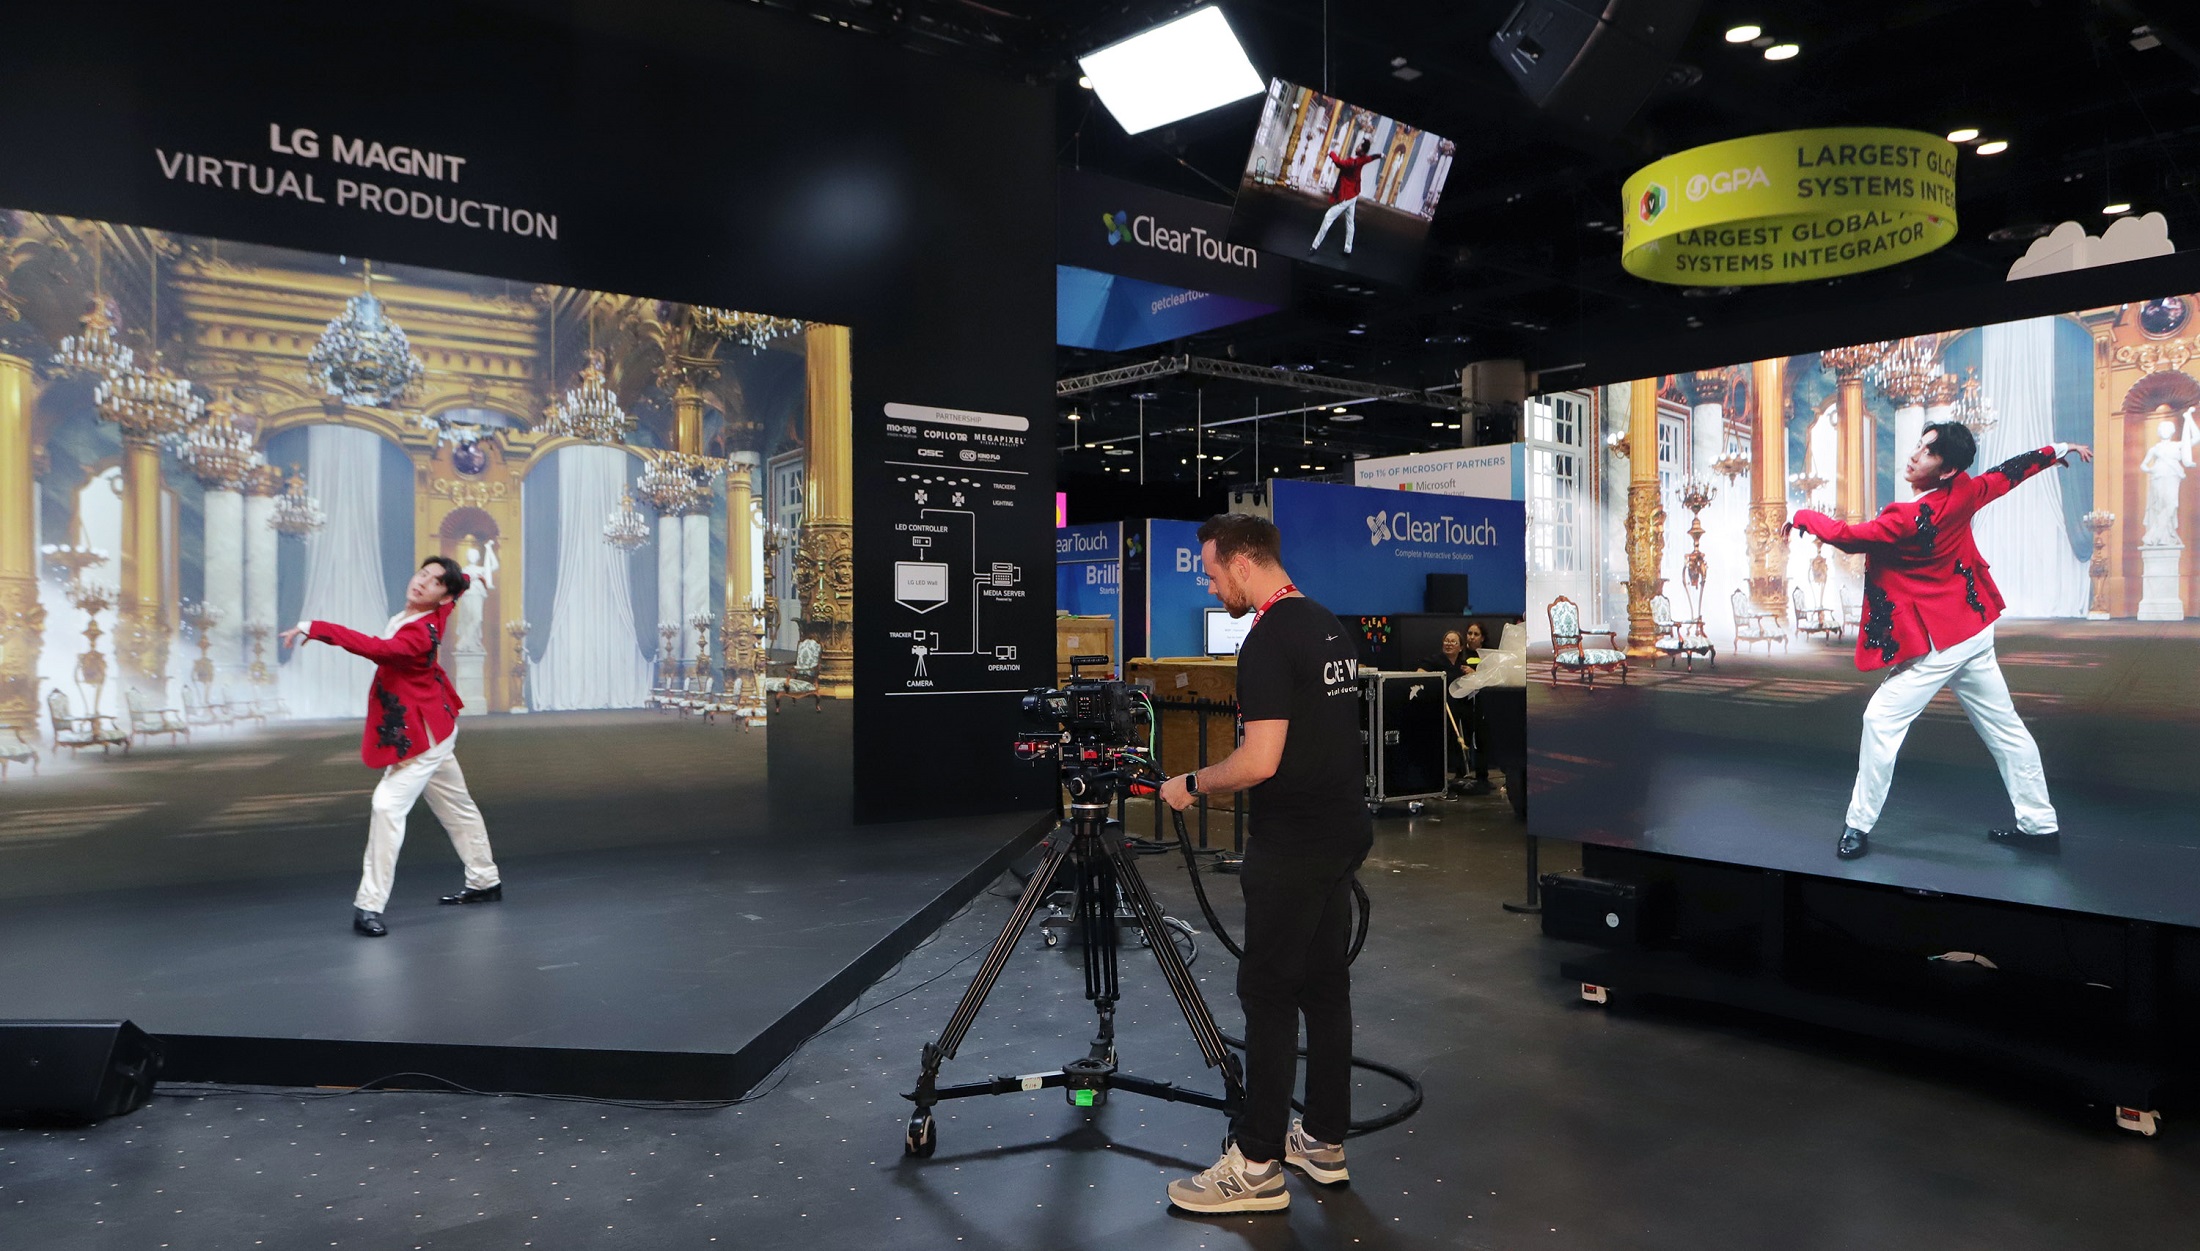 Commercial shooting demonstration with the LG MAGNIT Virtual Studio